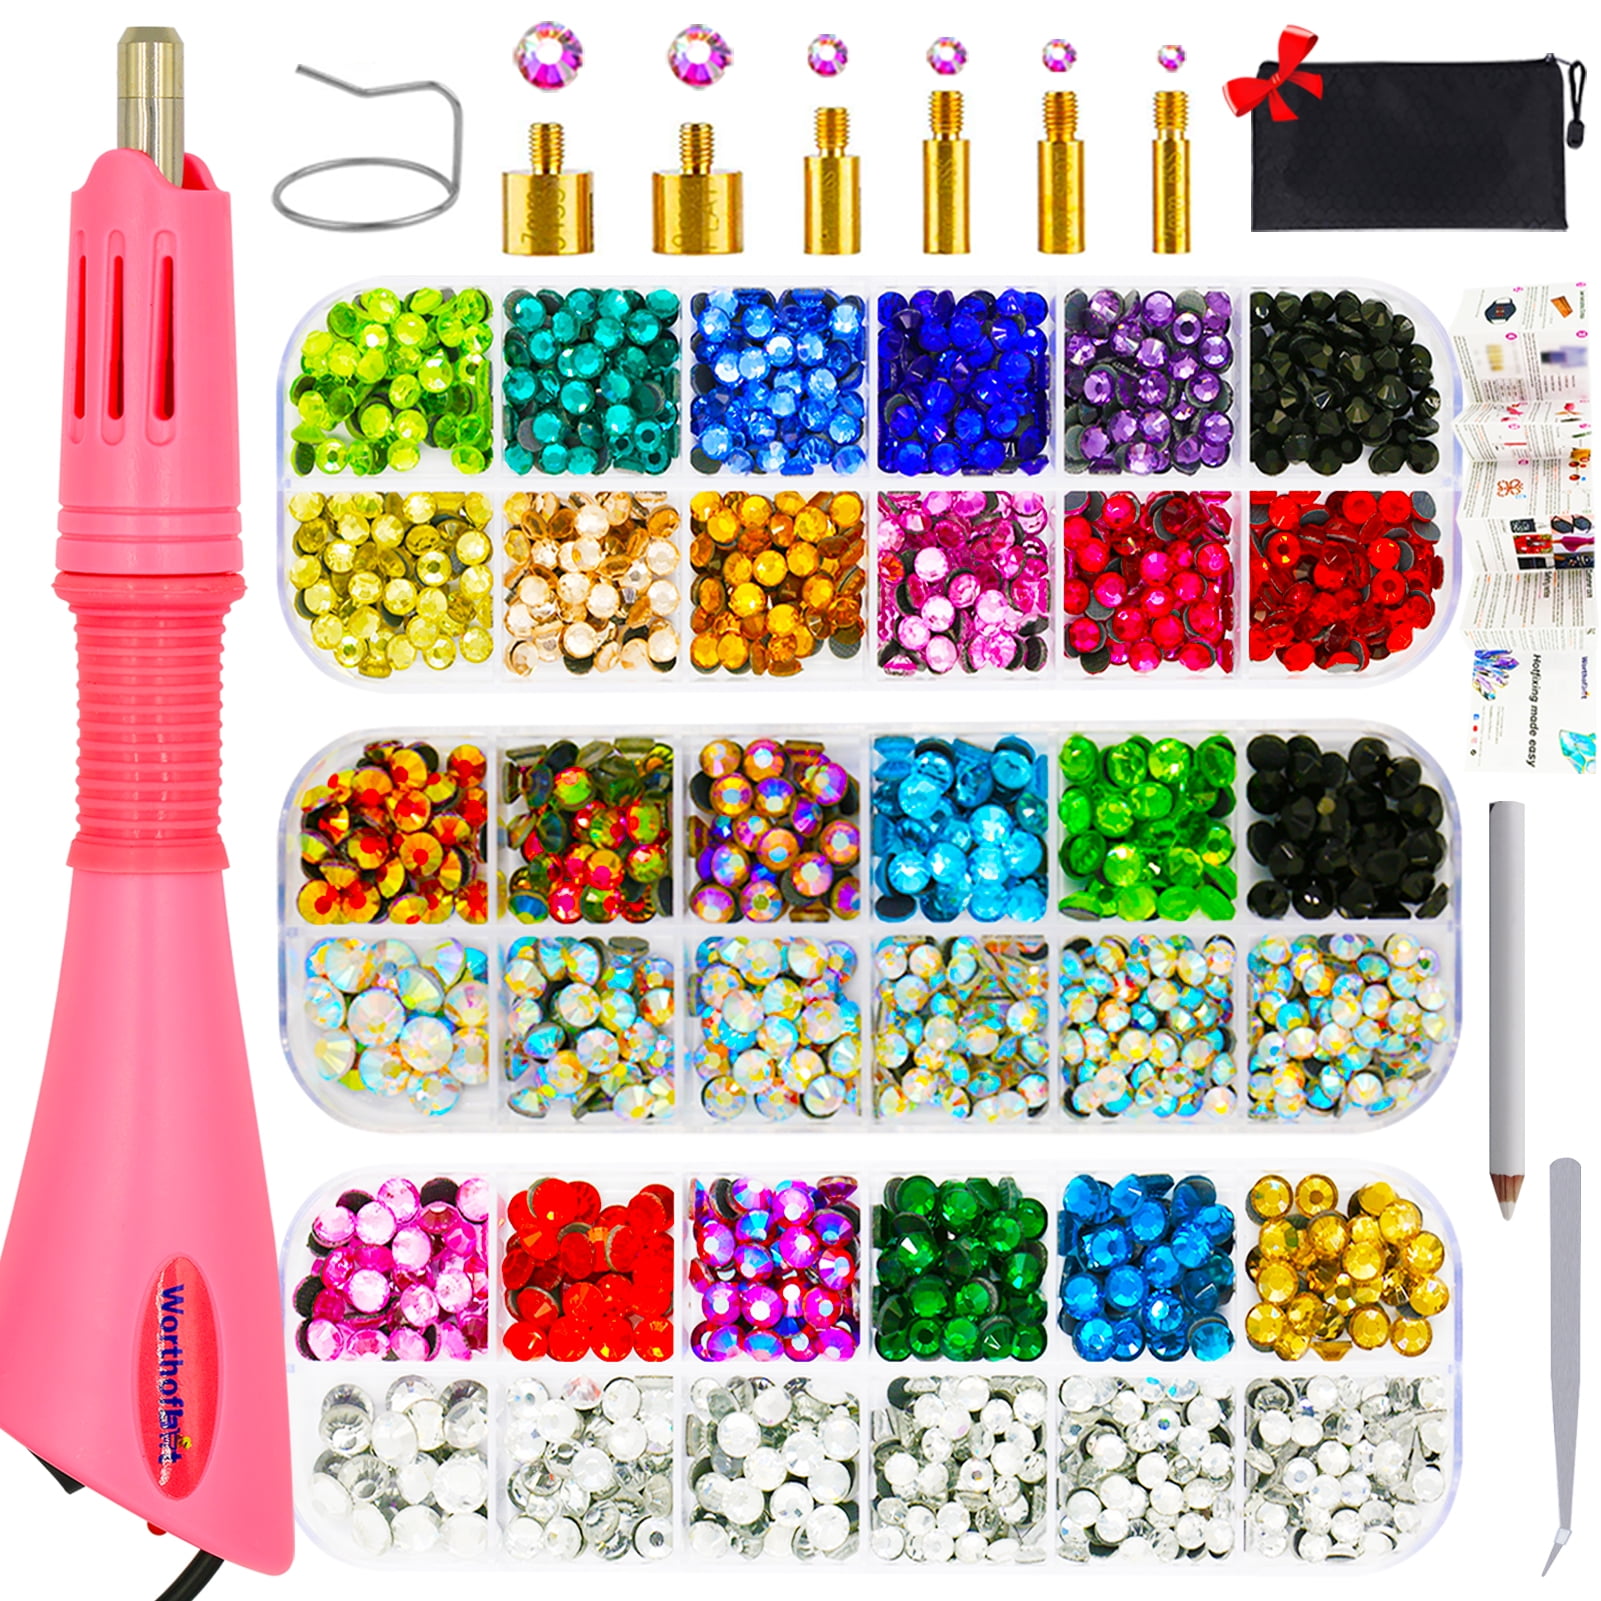  Bedazzler Kit with Rhinestones, Hotfix Rhinestones Applicator  Tool Gun, Bedazzle Kit for Clothing, Clothes, Fabric, Wood, Leather, Paper  - 4500 Pcs Hot Fix Crystals : Arts, Crafts & Sewing